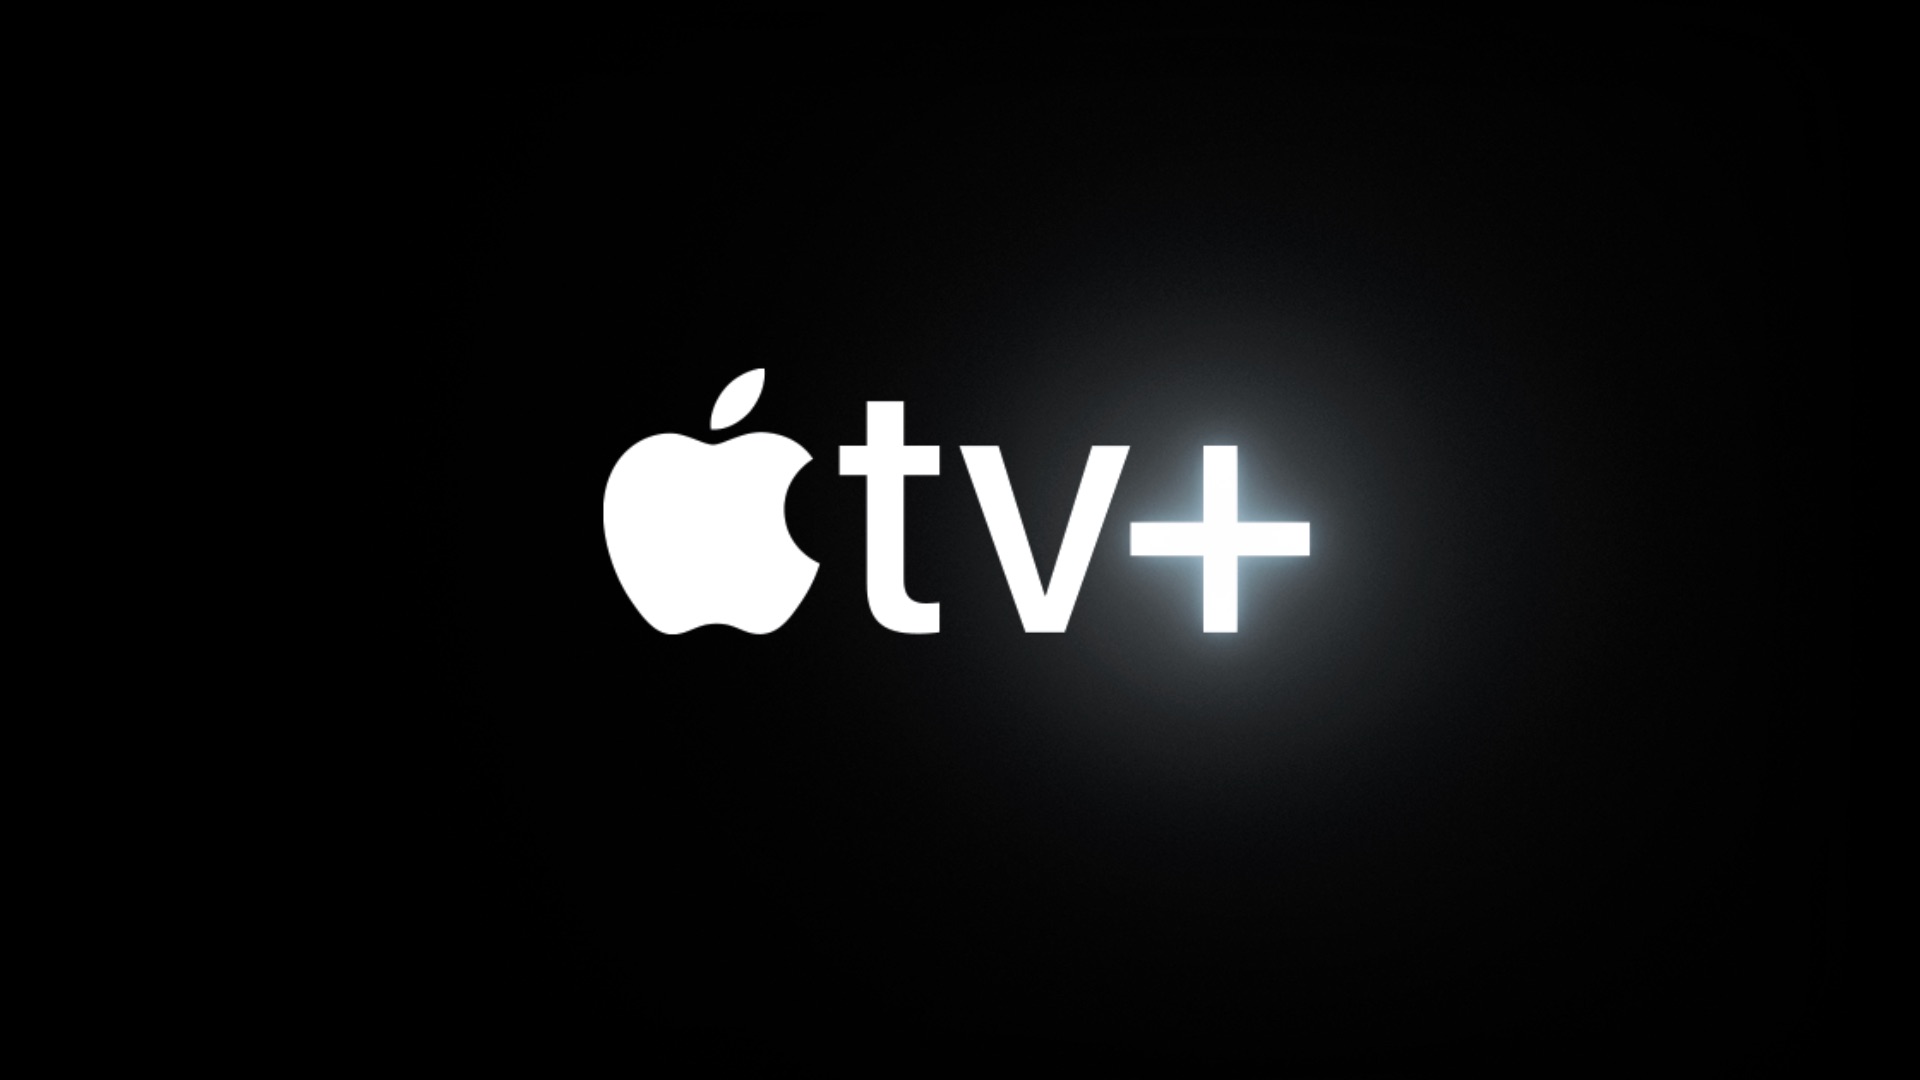 You could soon install Apple TV on your Samsung phone and tablet - SamMobile